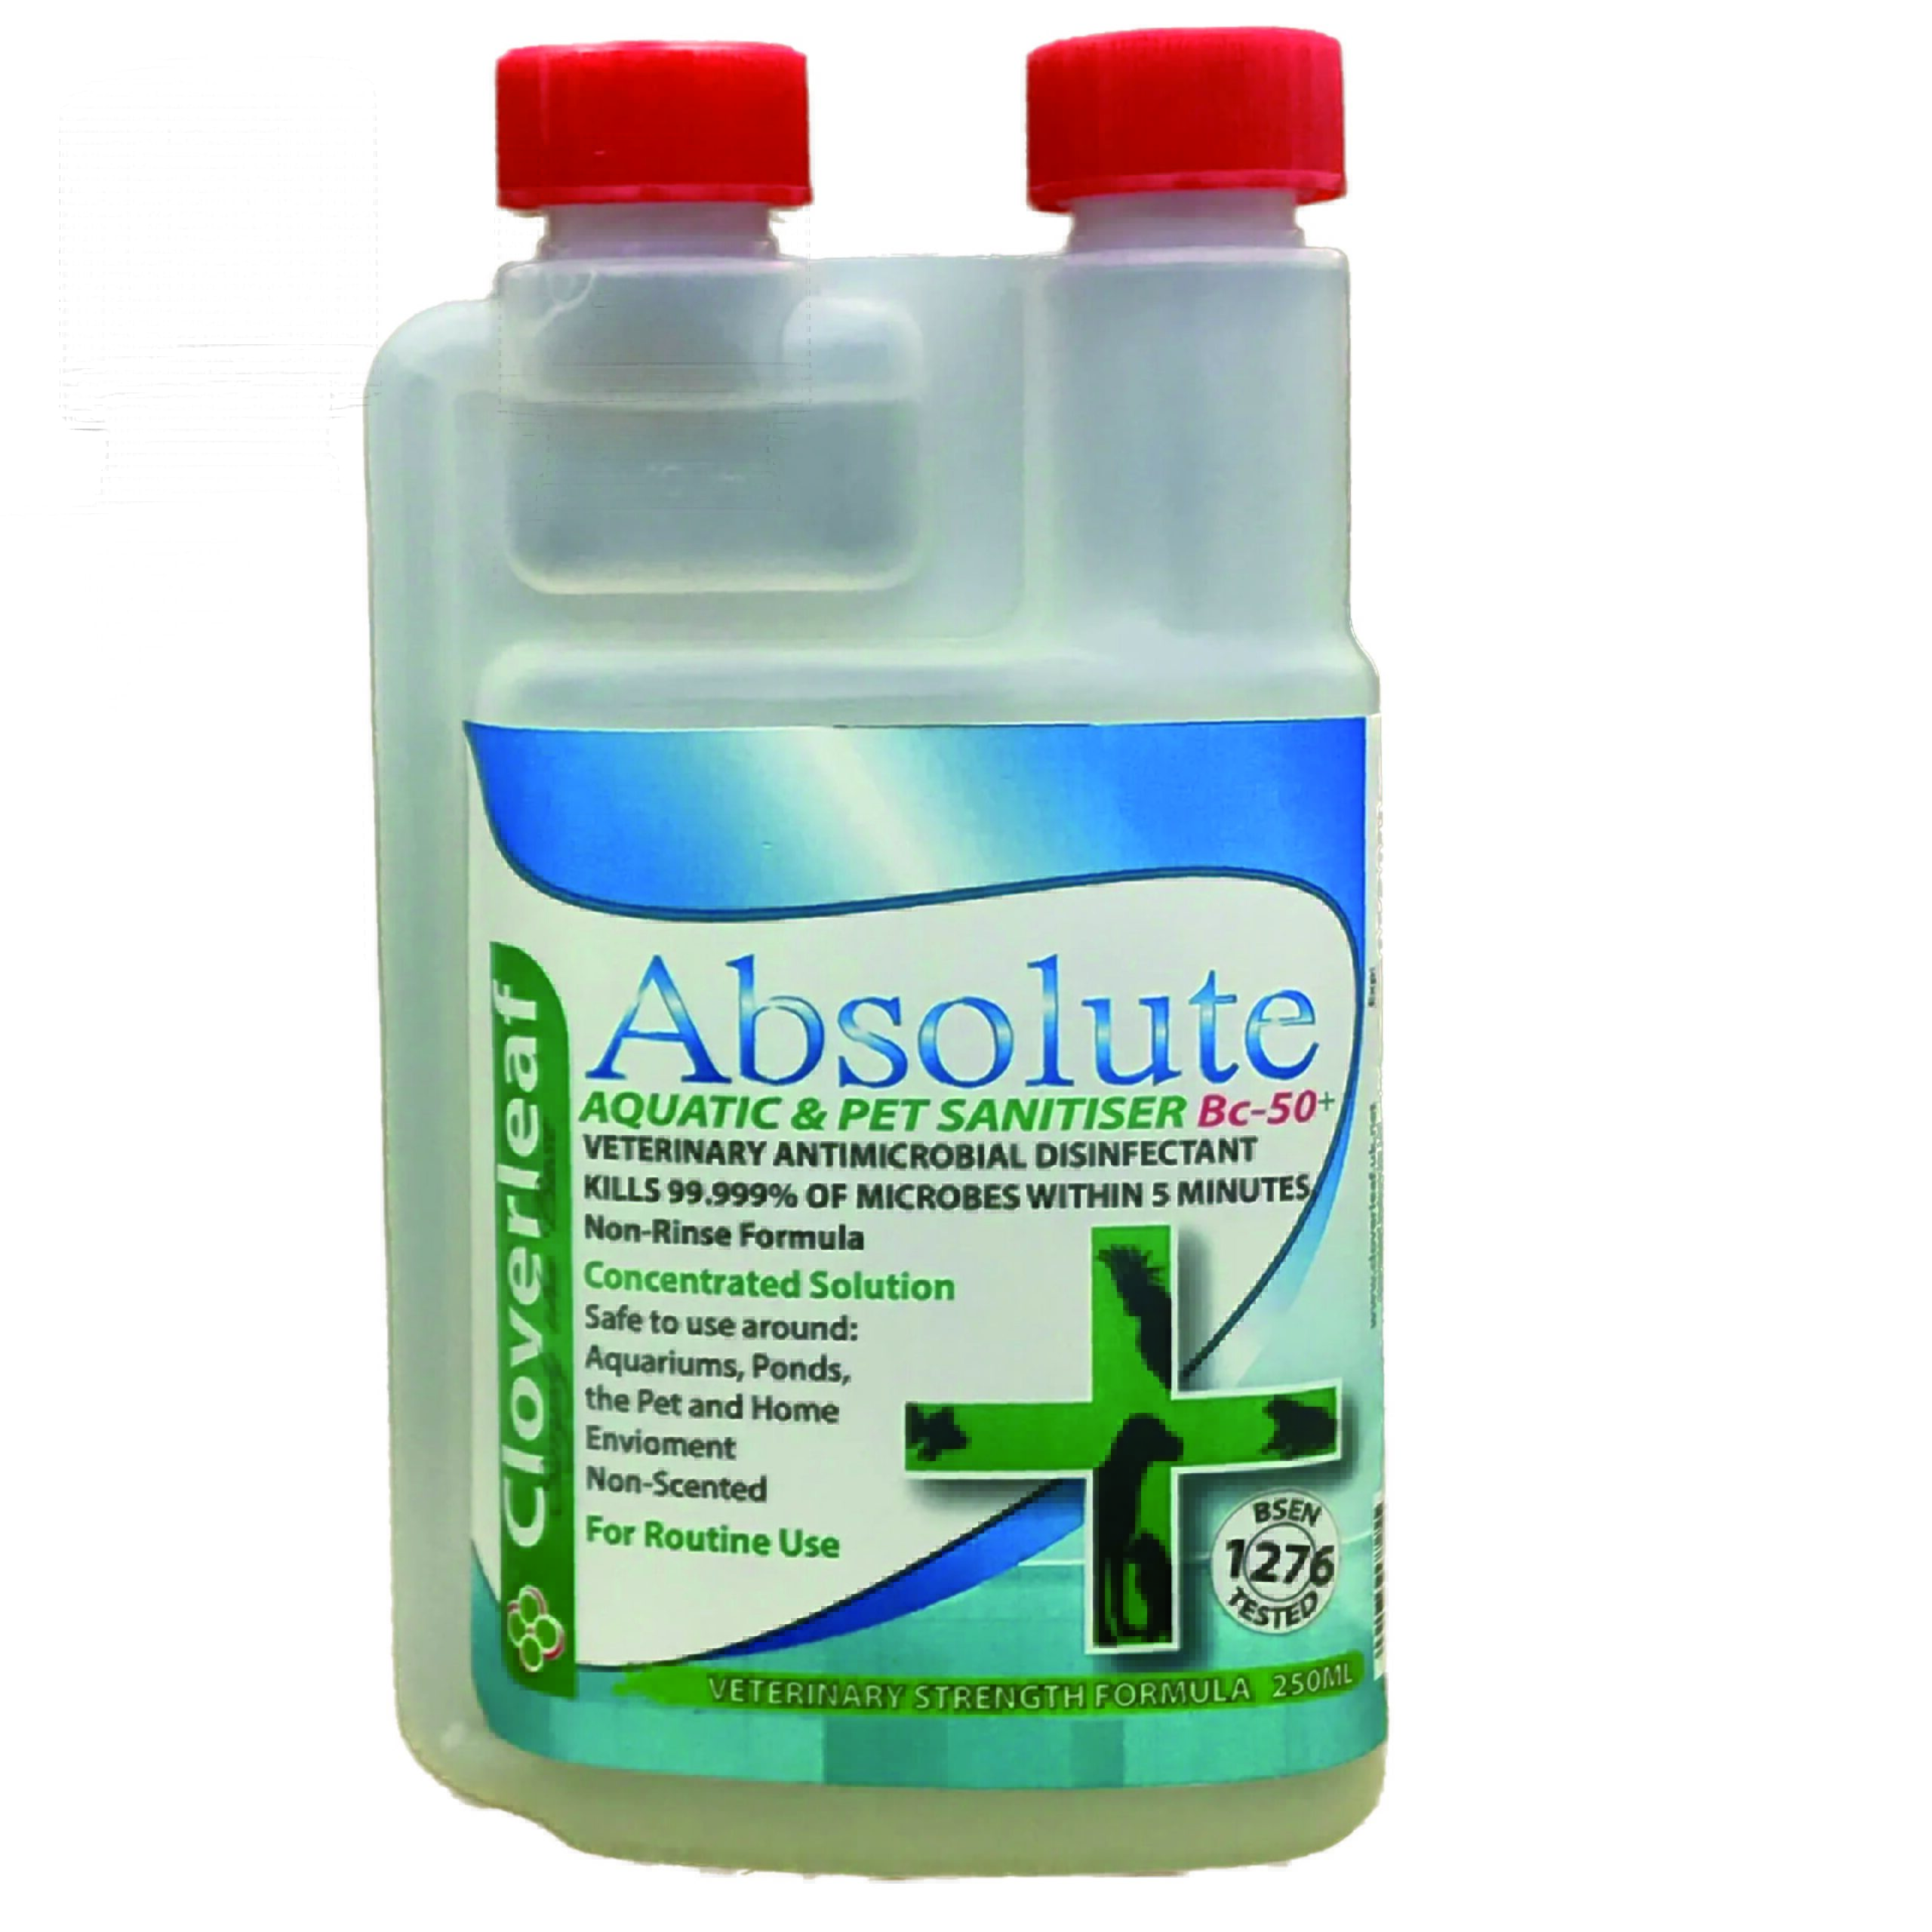 CL ABSOLUTE+ Aquatic&PetSanitiser 250mlConcentrate